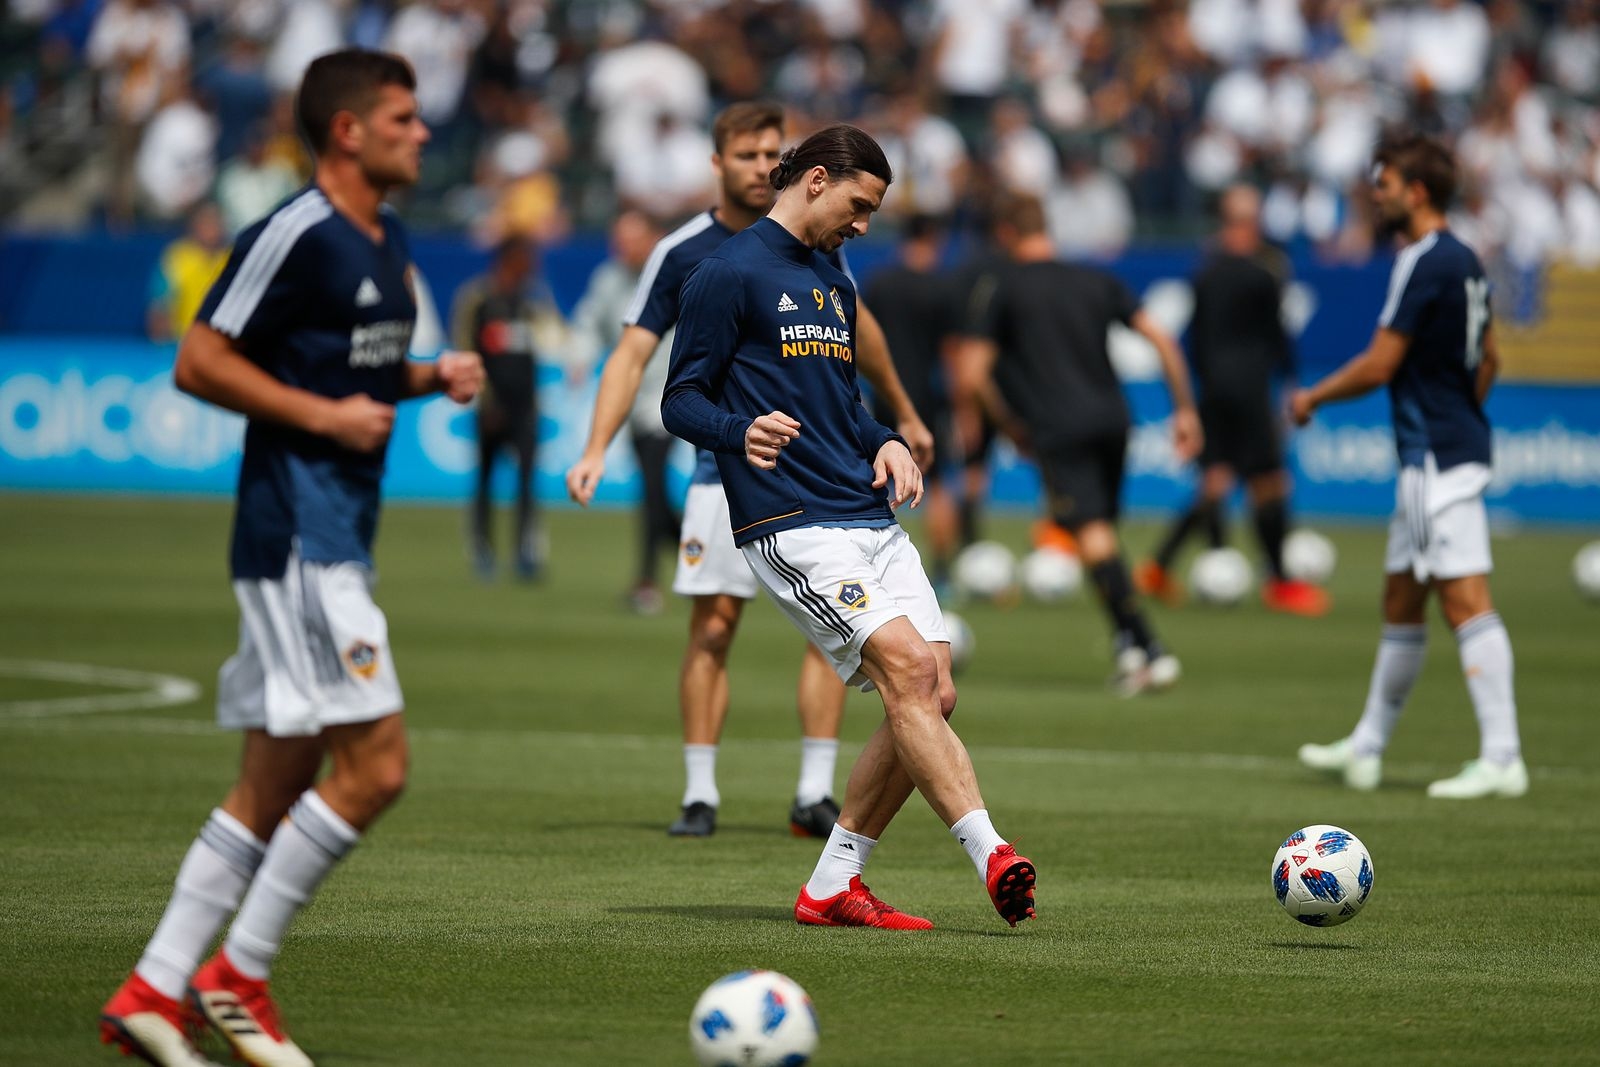 Los Angeles Galaxy's Zlatan Ibrahimovic, center, of Sweden, warms up before the team's MLS soccer match against the Los Angeles FC, Saturday, March 31, 2018, in Carson, Calif. (AP Photo/Jae C. Hong)